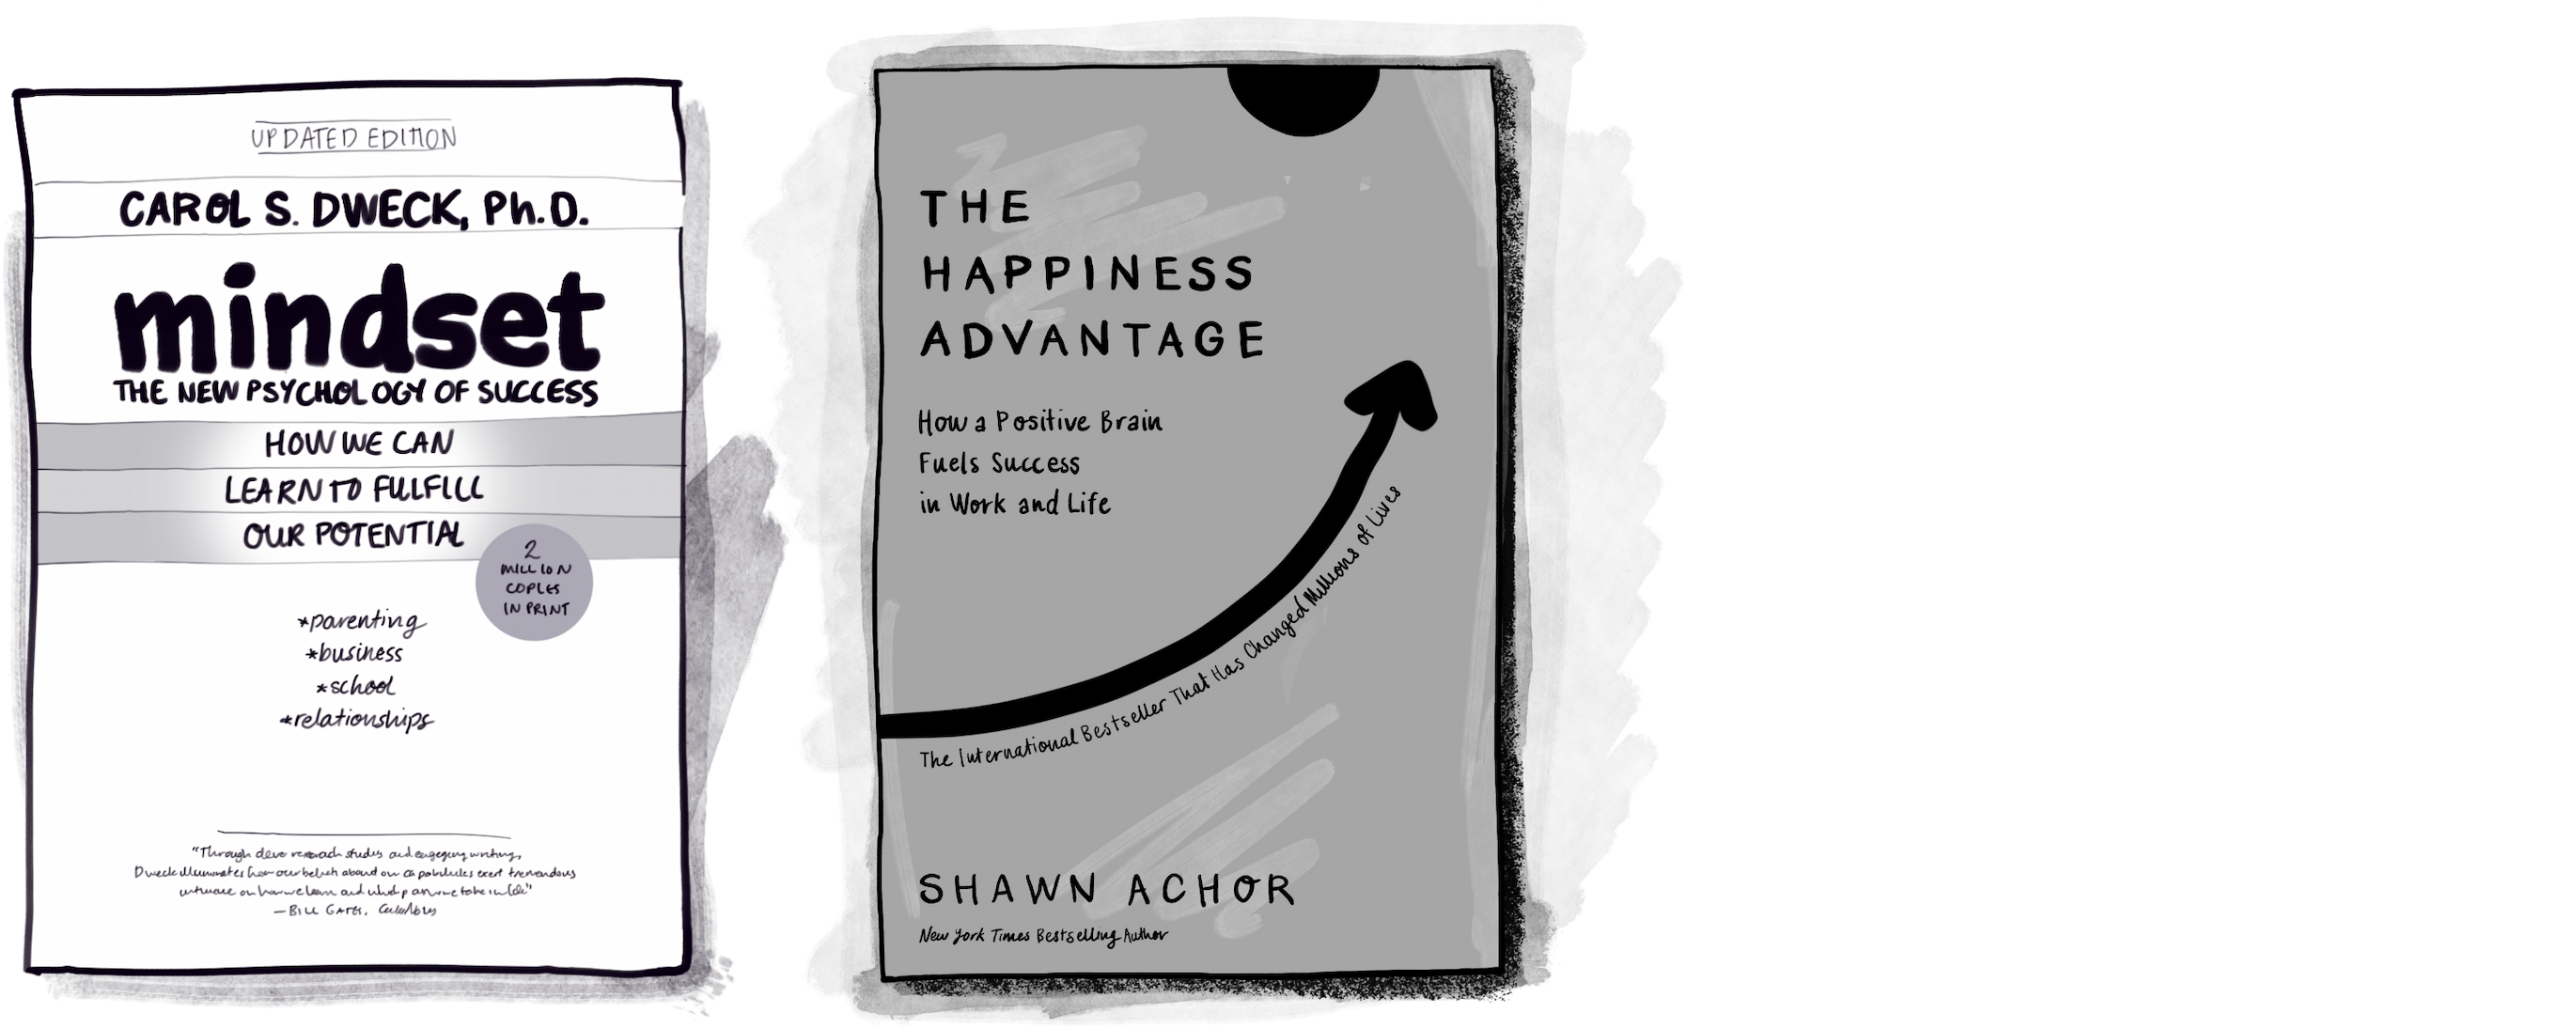 Personal development books for the Jimmy bookclub include Mindset by Carol Dwyek, and The Happiness Advantage by Shawn Achor.